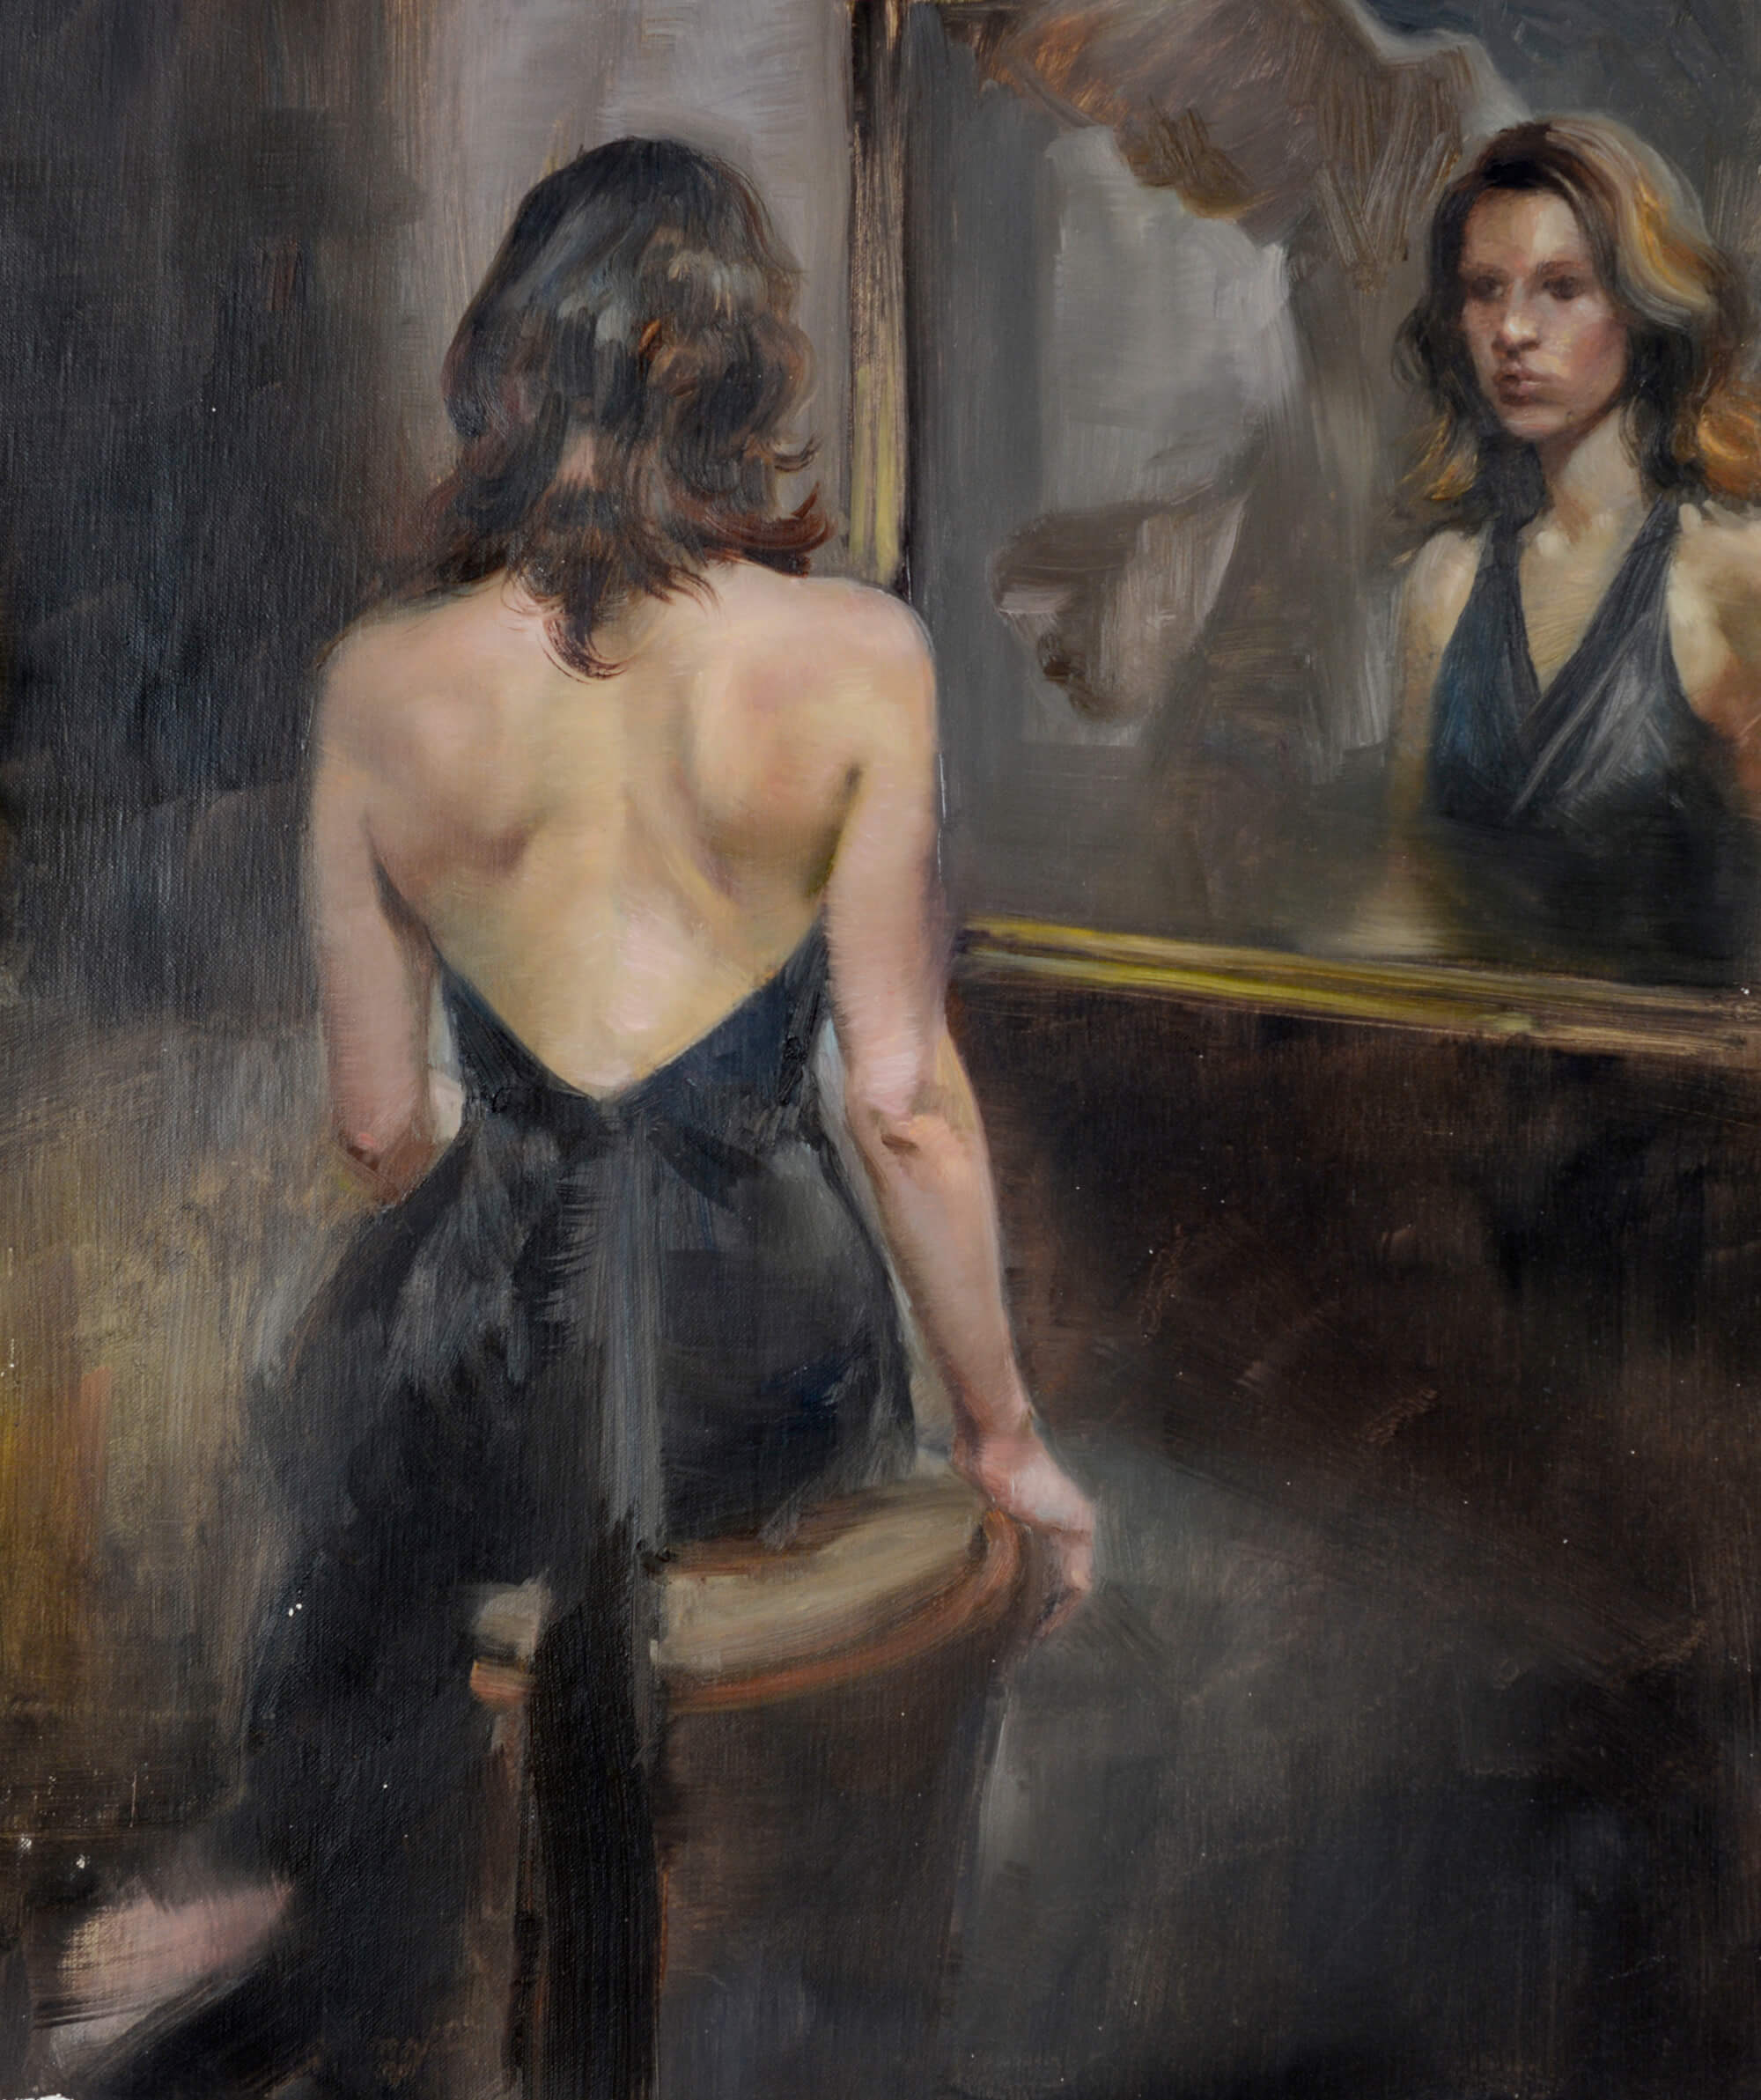 Figurative oil painting and portrait of a young woman wearing a black halter dress seated in front of a mirror